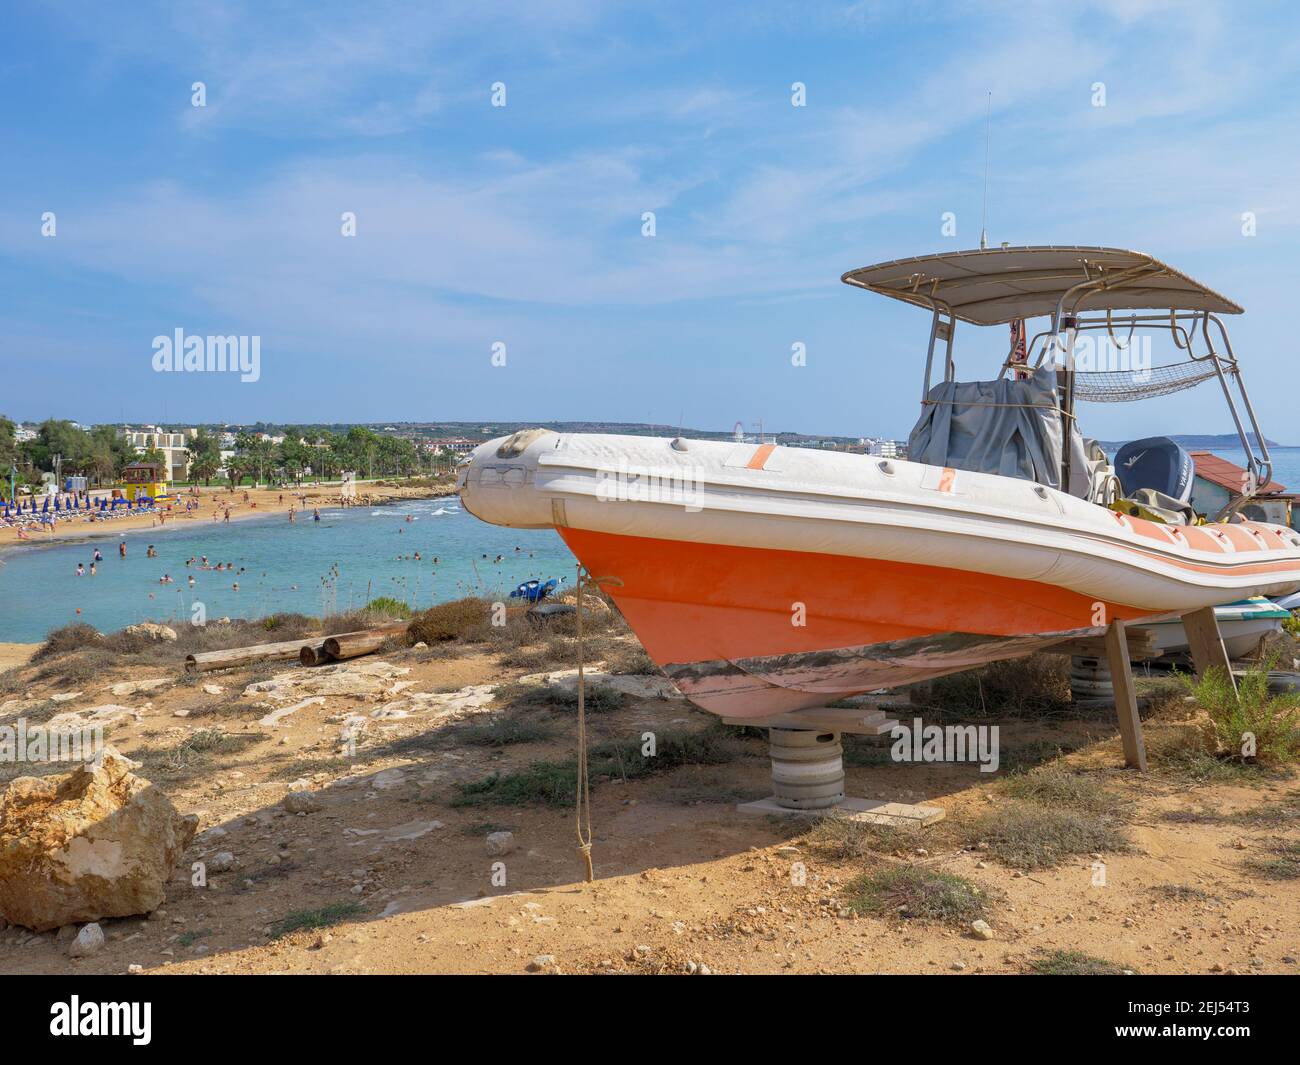 Orange and white powerboat standing on tires and wooden supports at the shore in Ayia Napa. Mediterranean sea in the background. Stock Photo